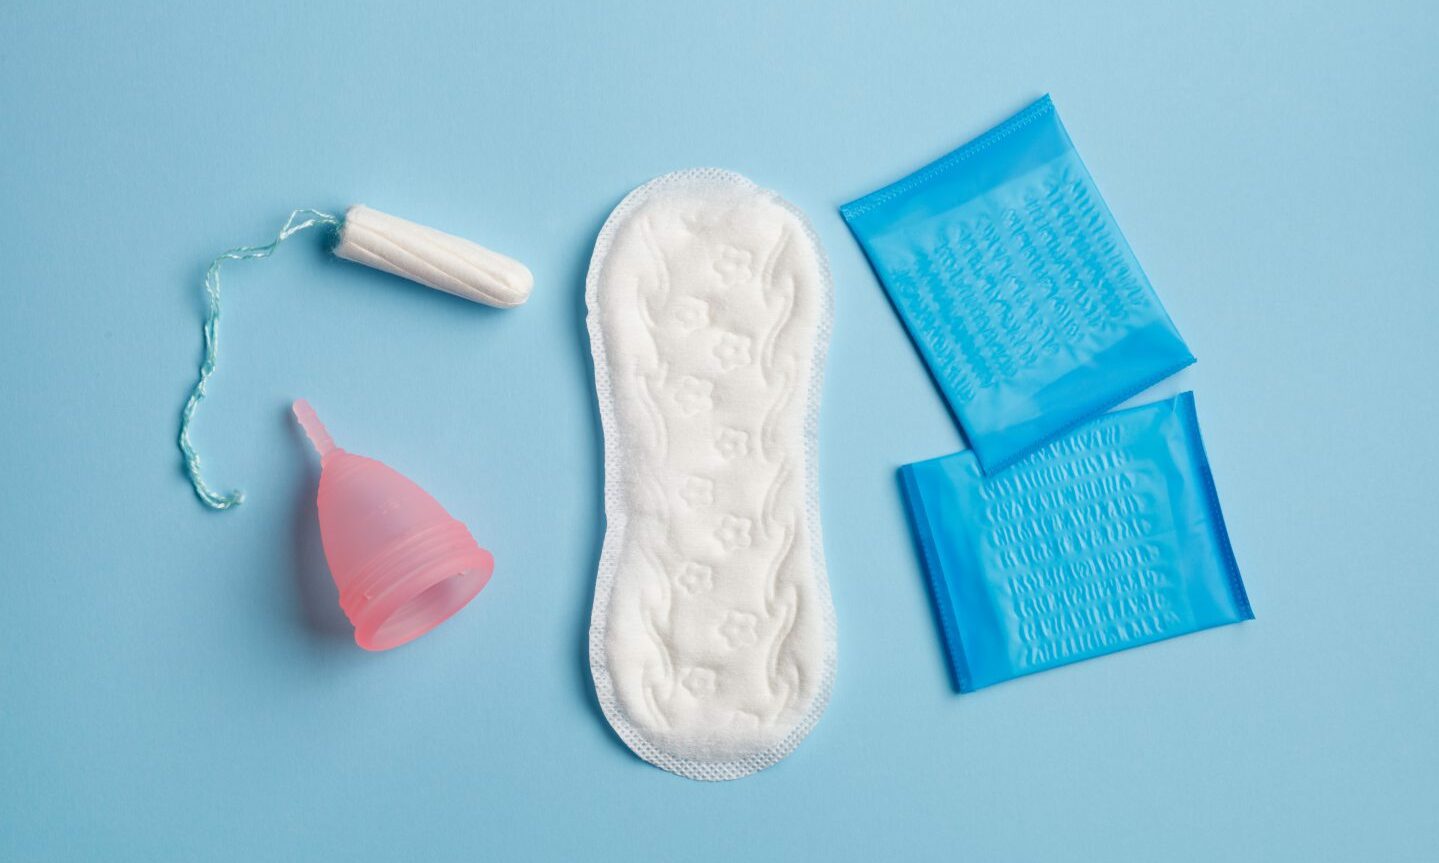 period products law